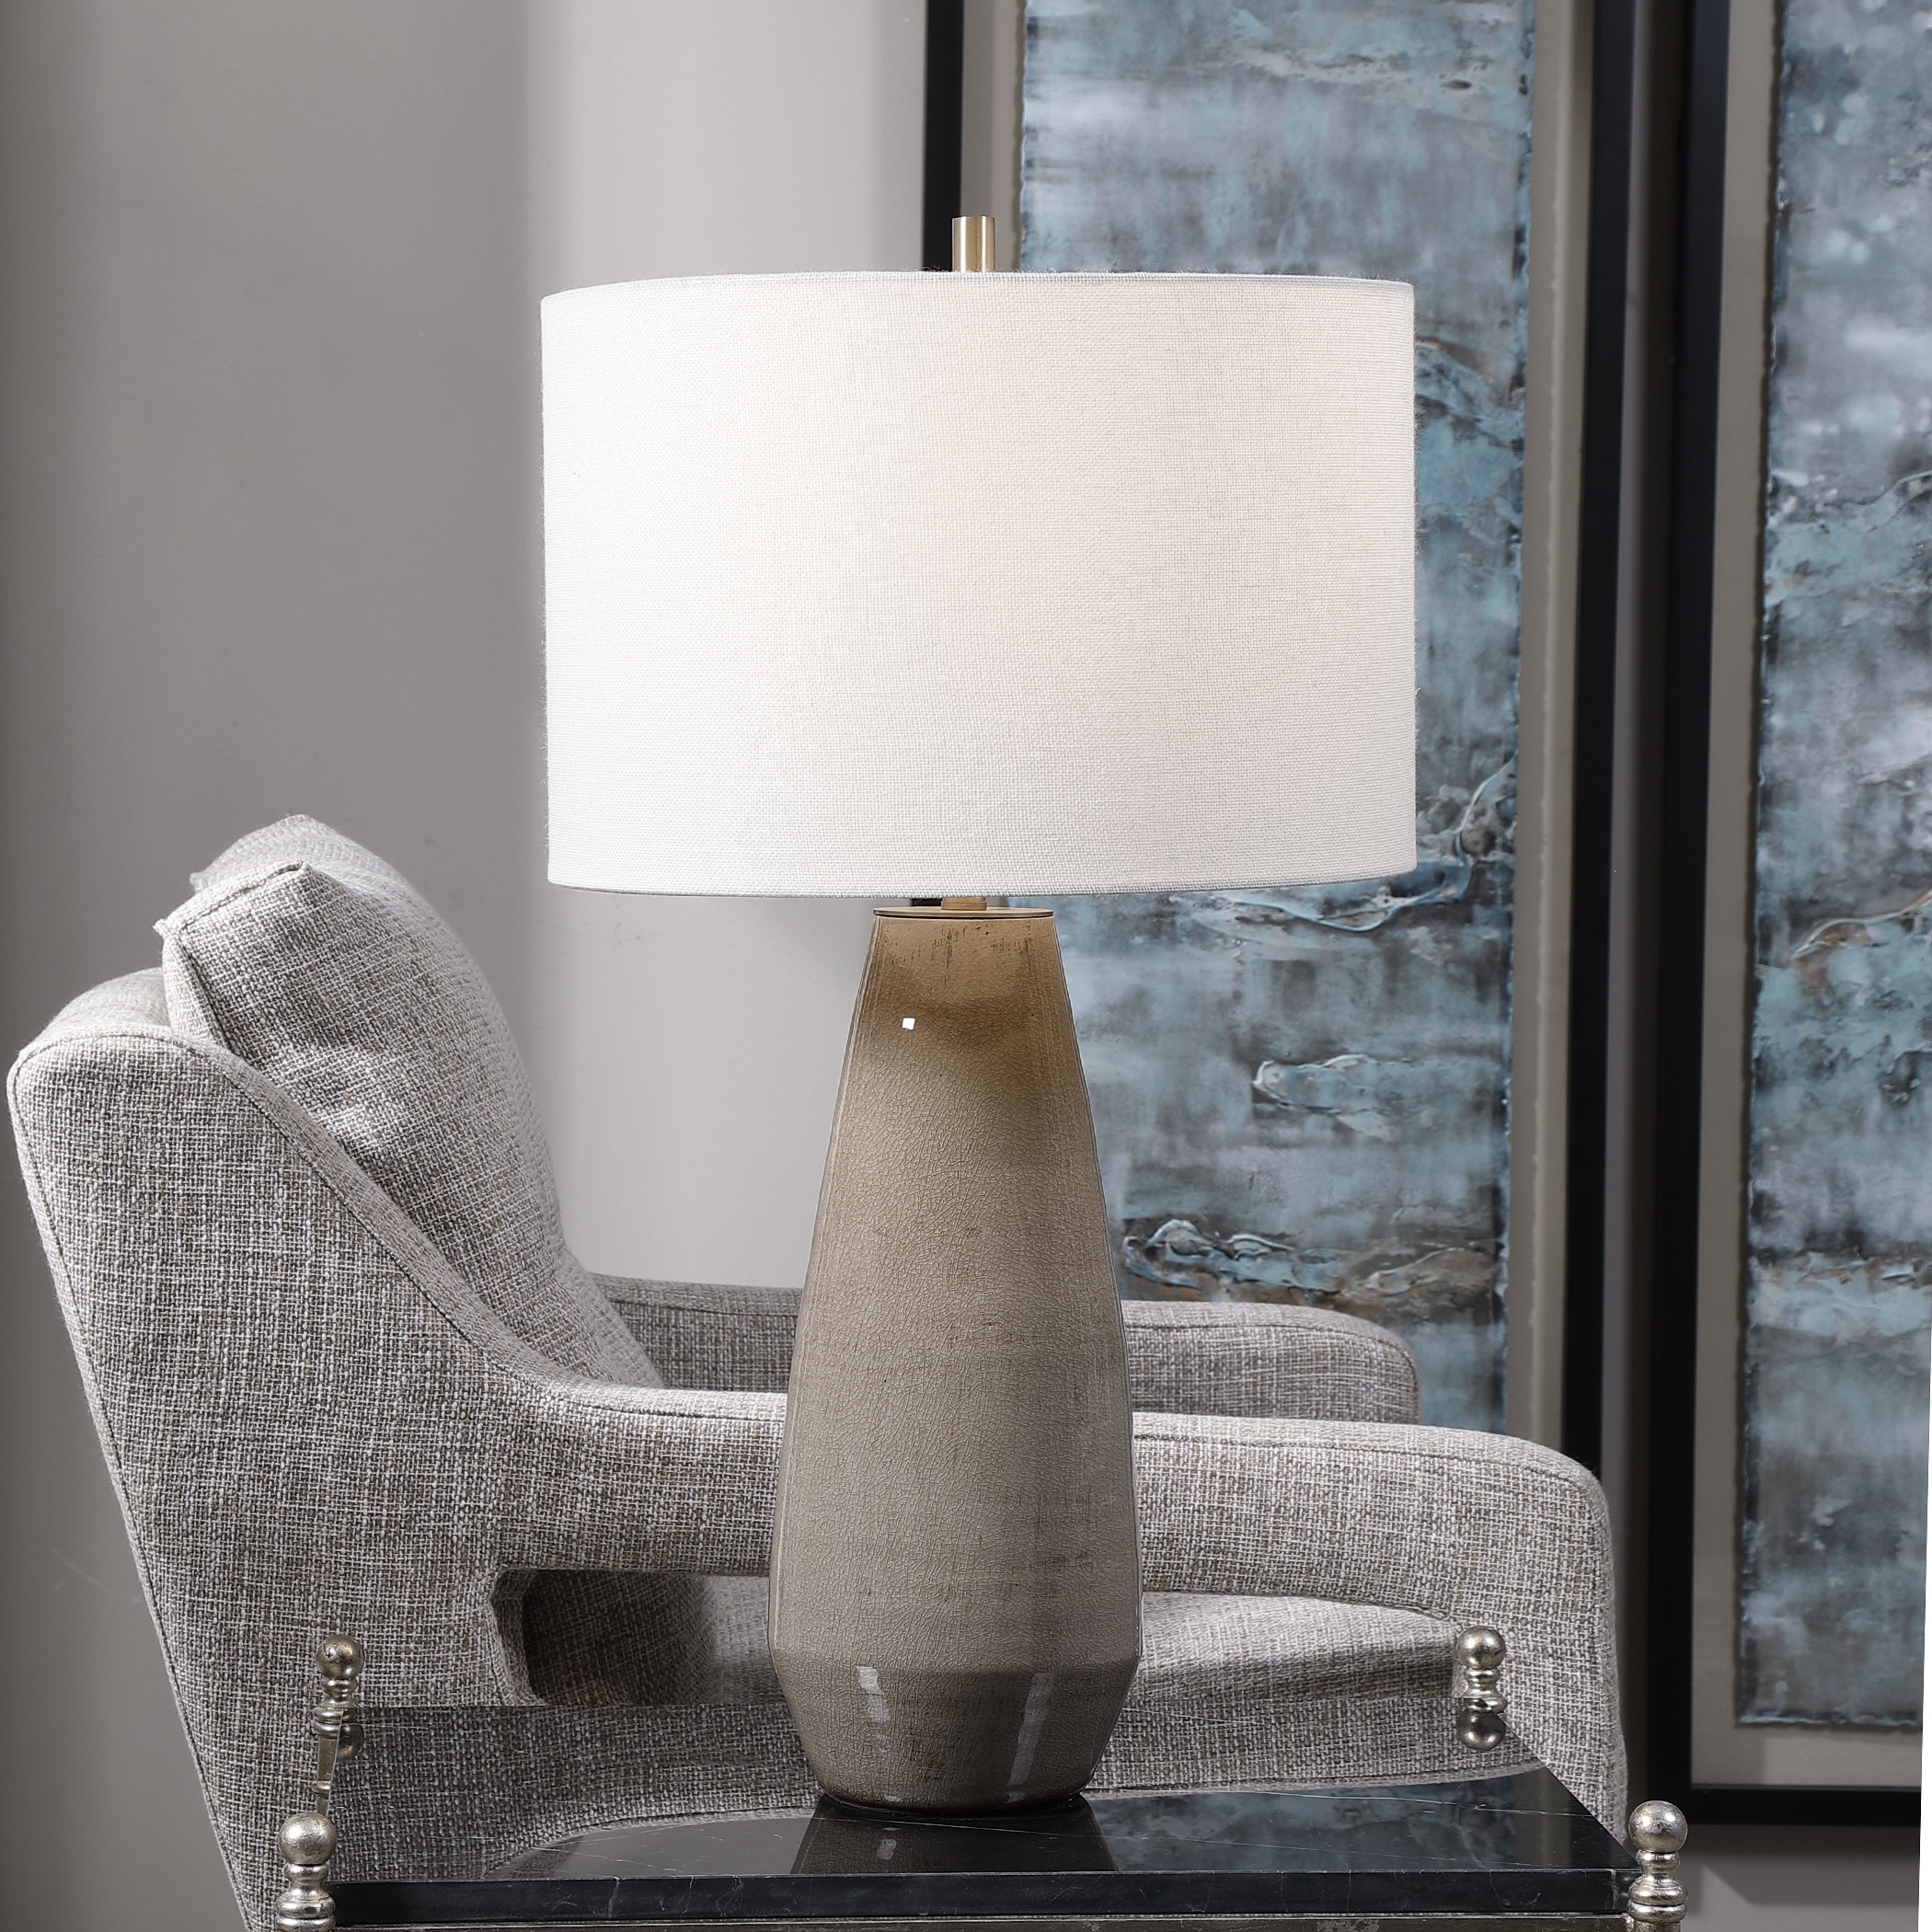 Volterra Taupe-Gray Table Lamp - Image 1